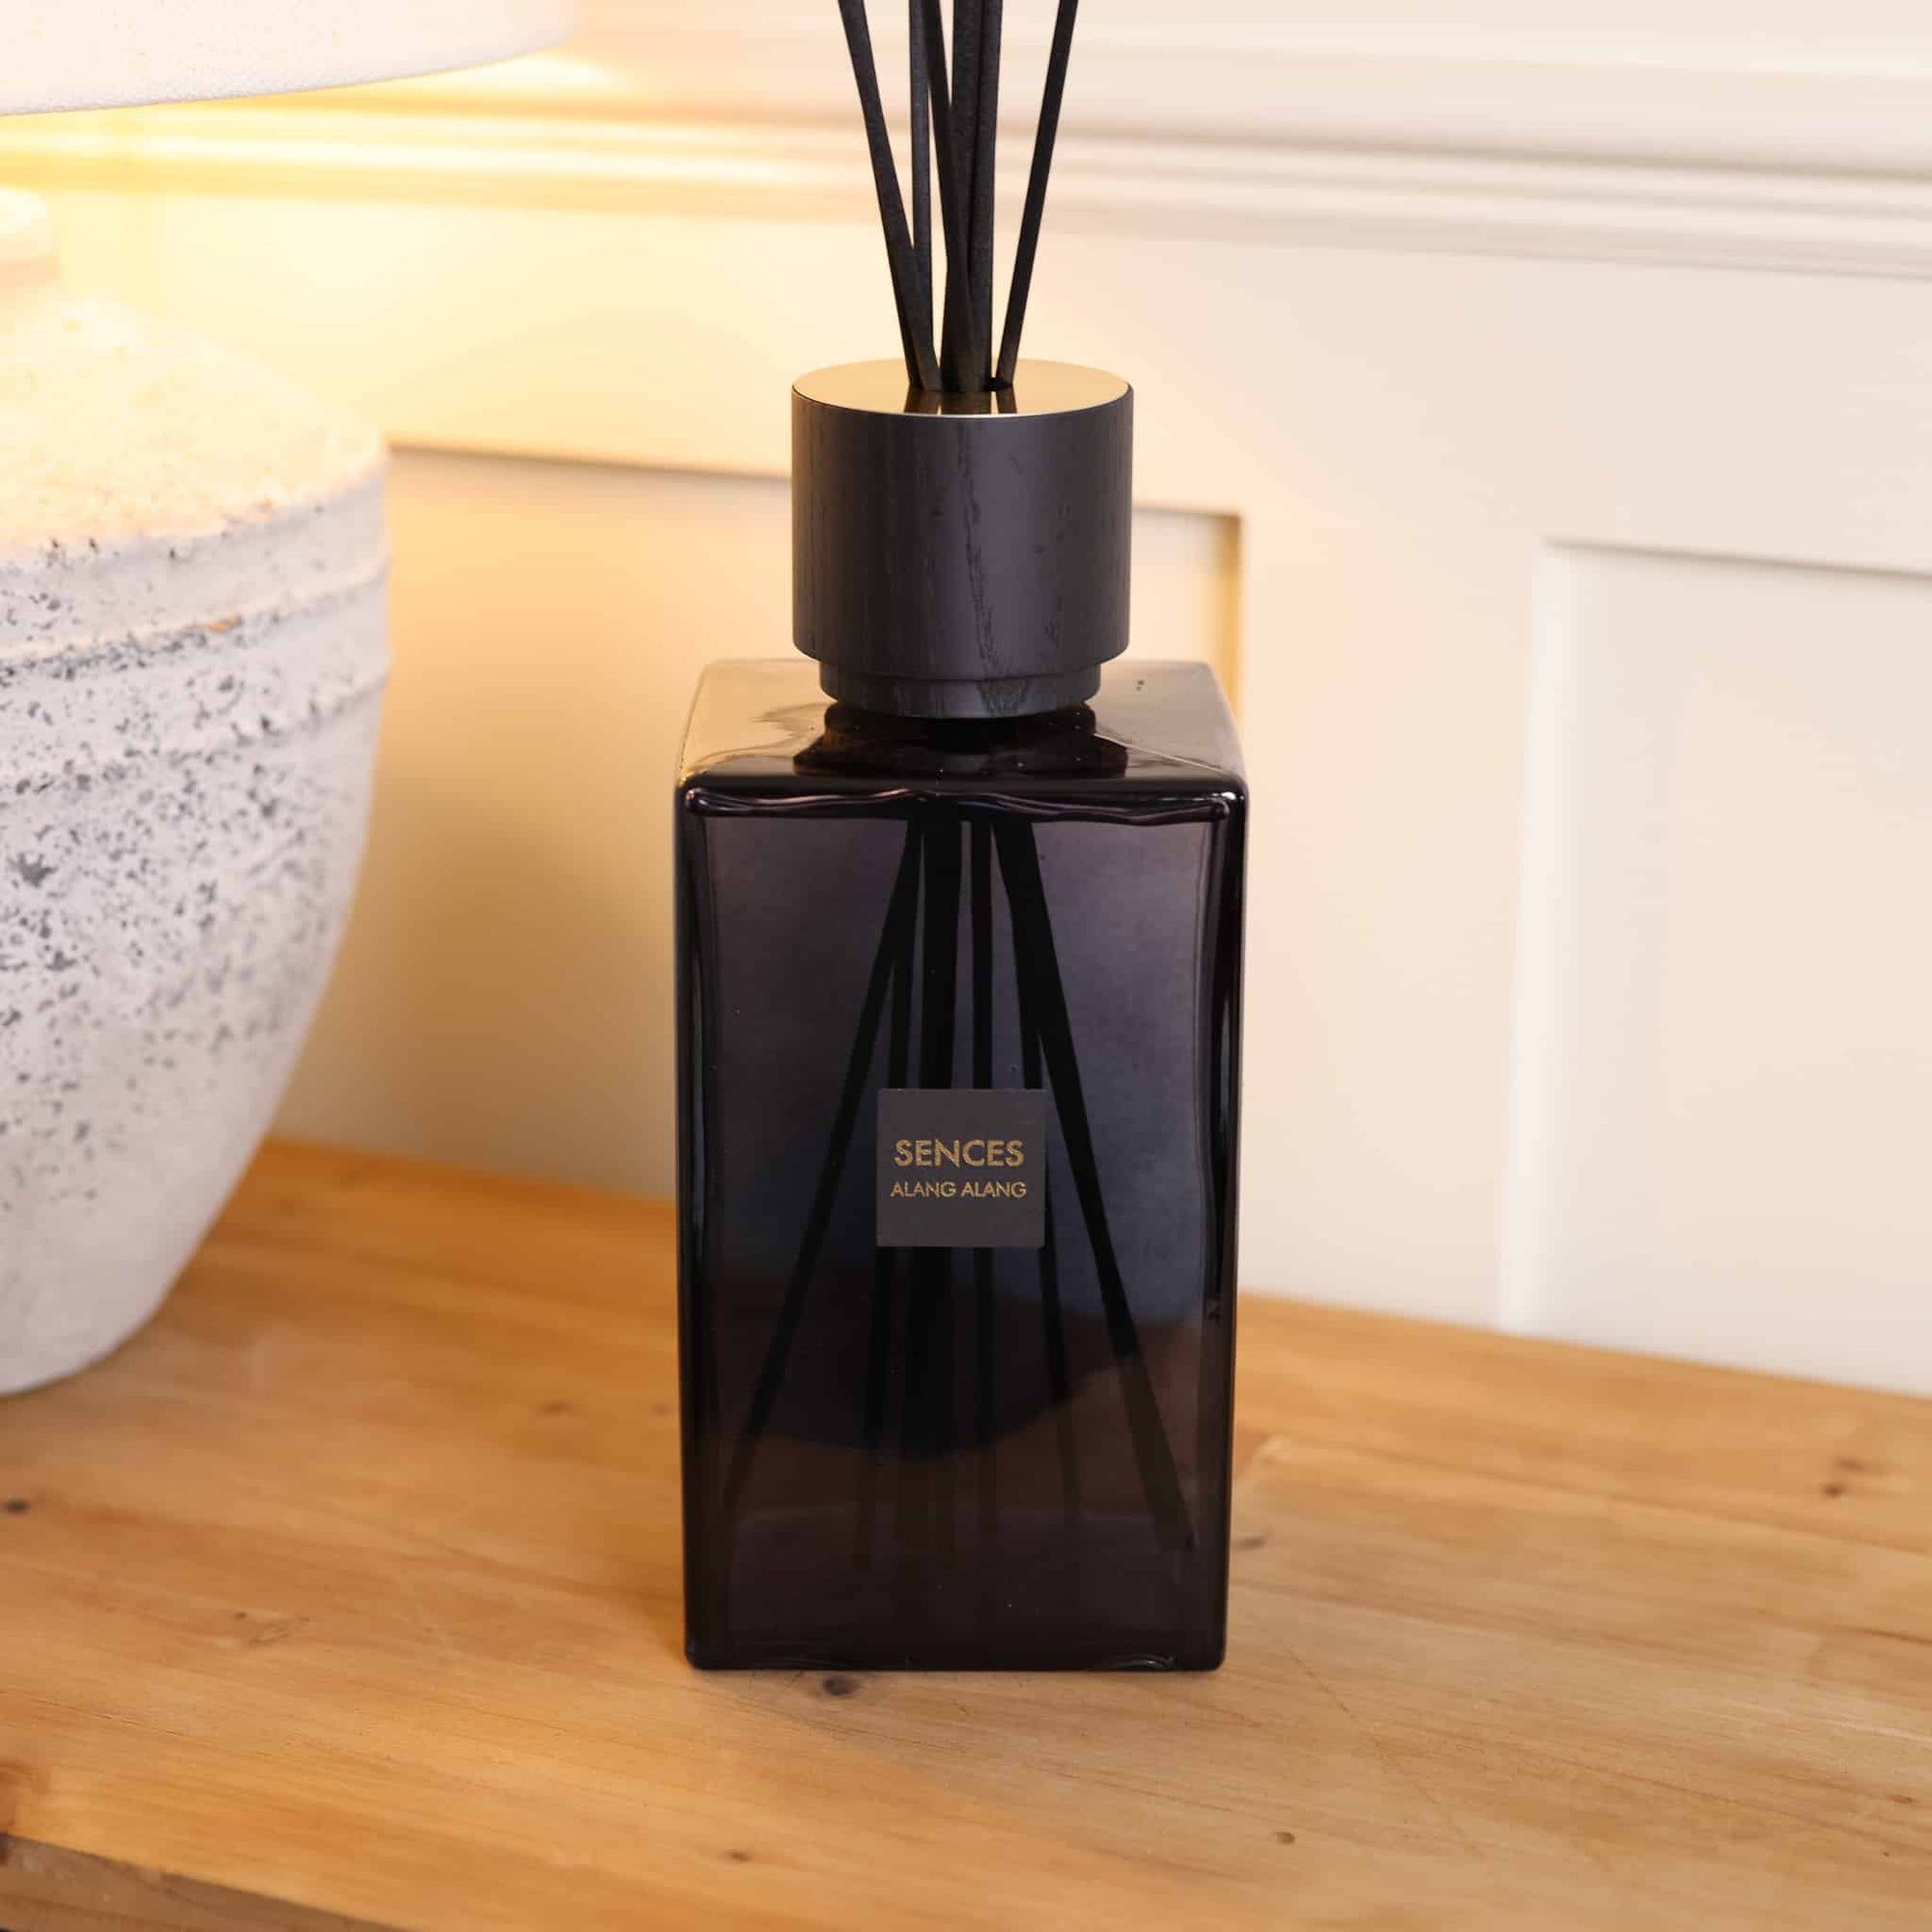 Sences Alang Alang Onyx Extra Large Reed Diffuser on wooden console styled with lamp